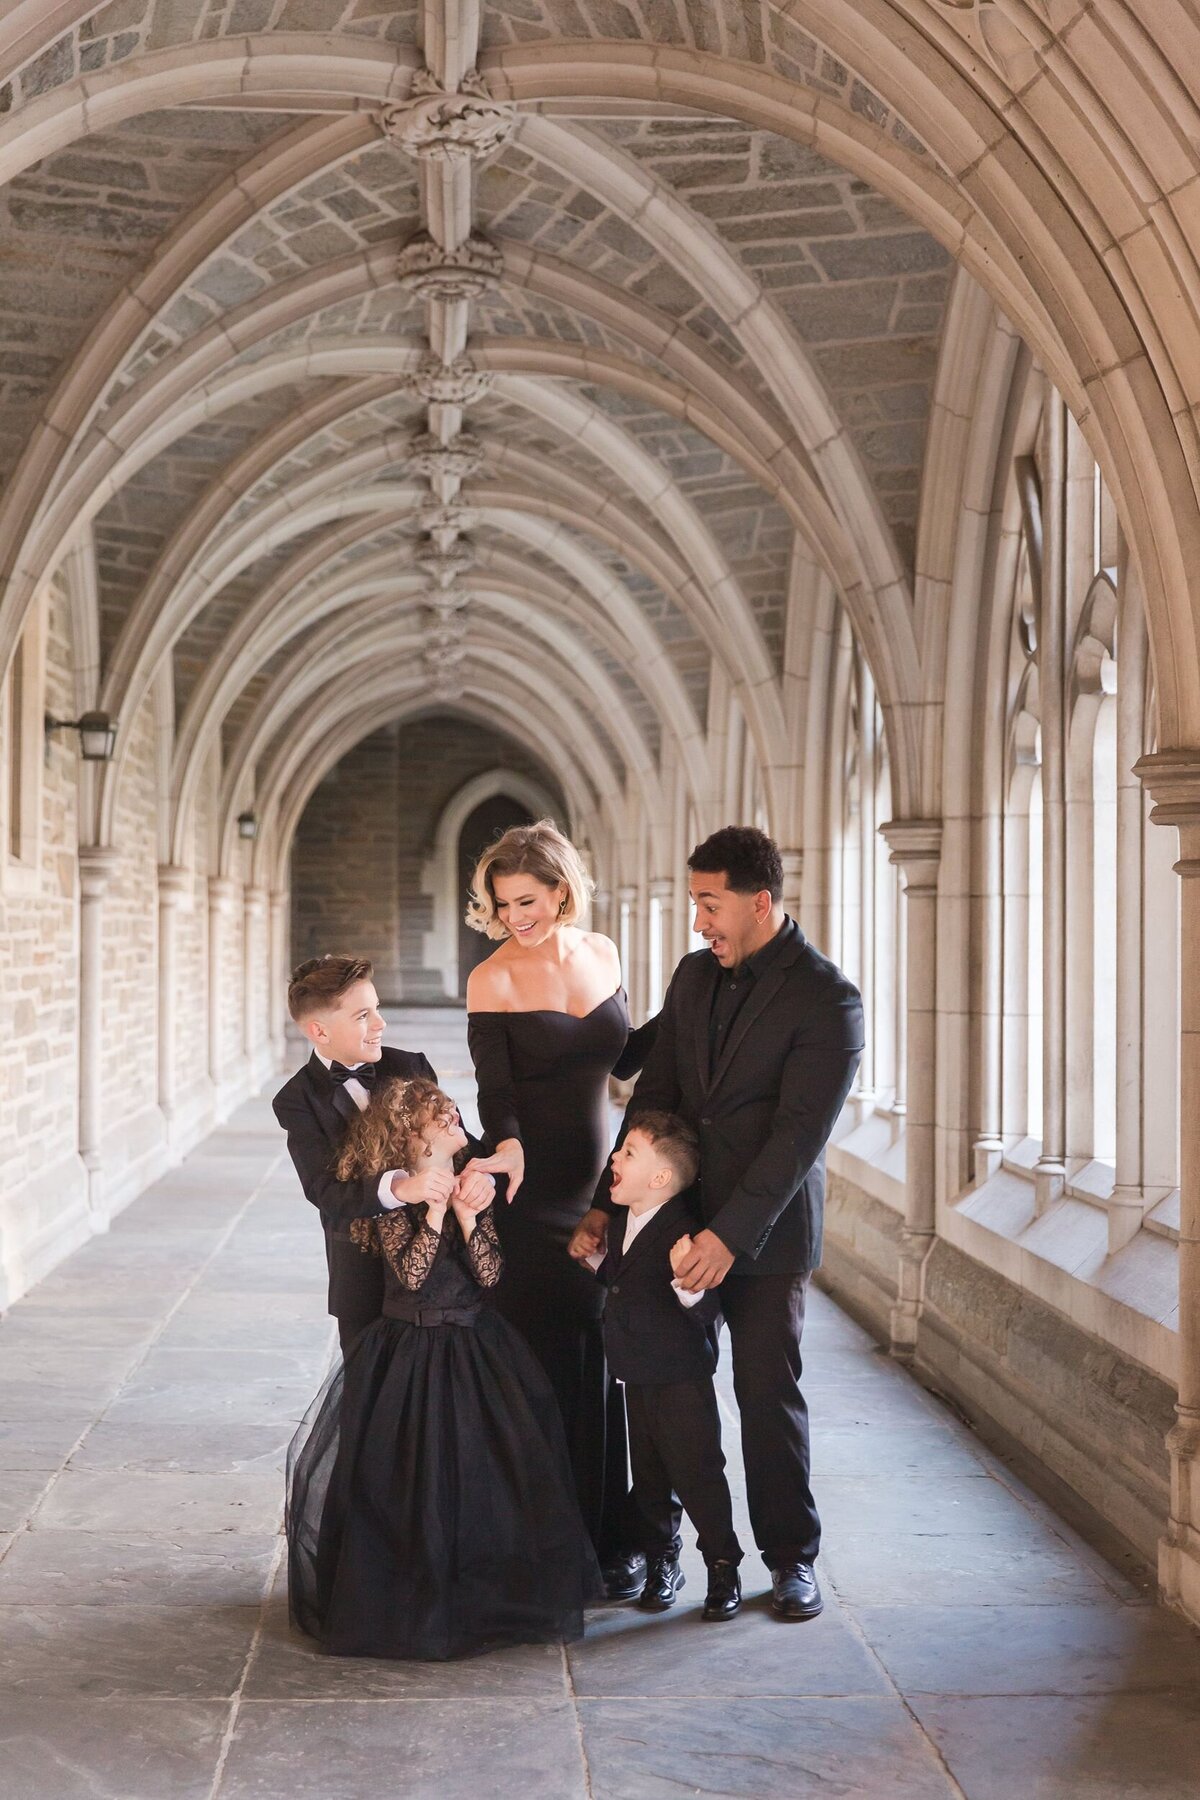 Family dressed formally in all black under church archway